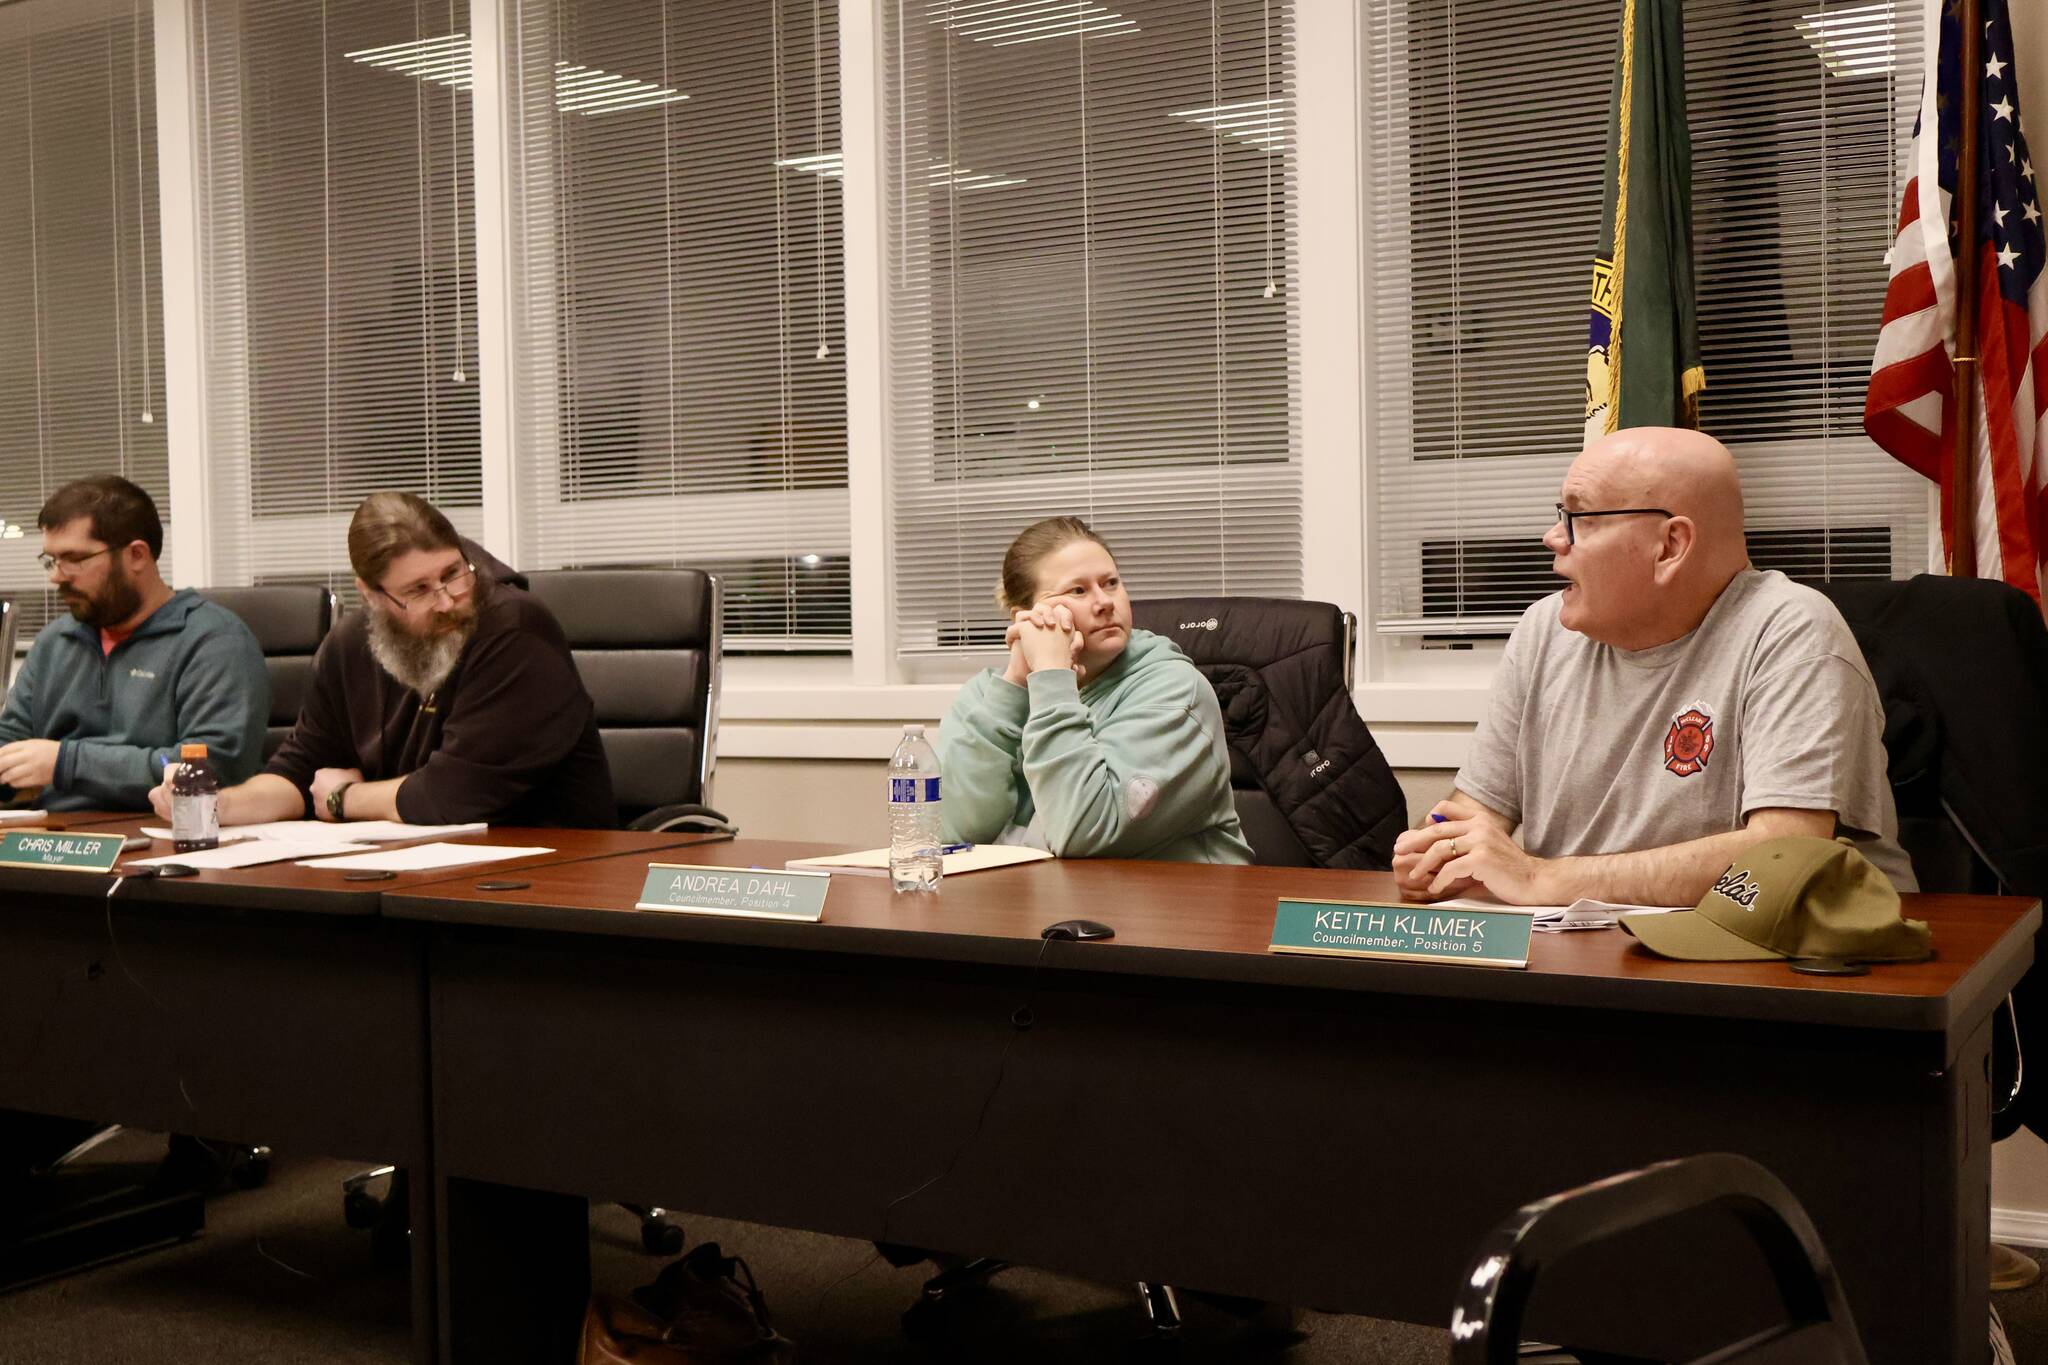 McCleary city council member Keith Klimek, right, speaks to the council about confirming the new fire chief during a city council meeting. (Michael S. Lockett / The Daily World)